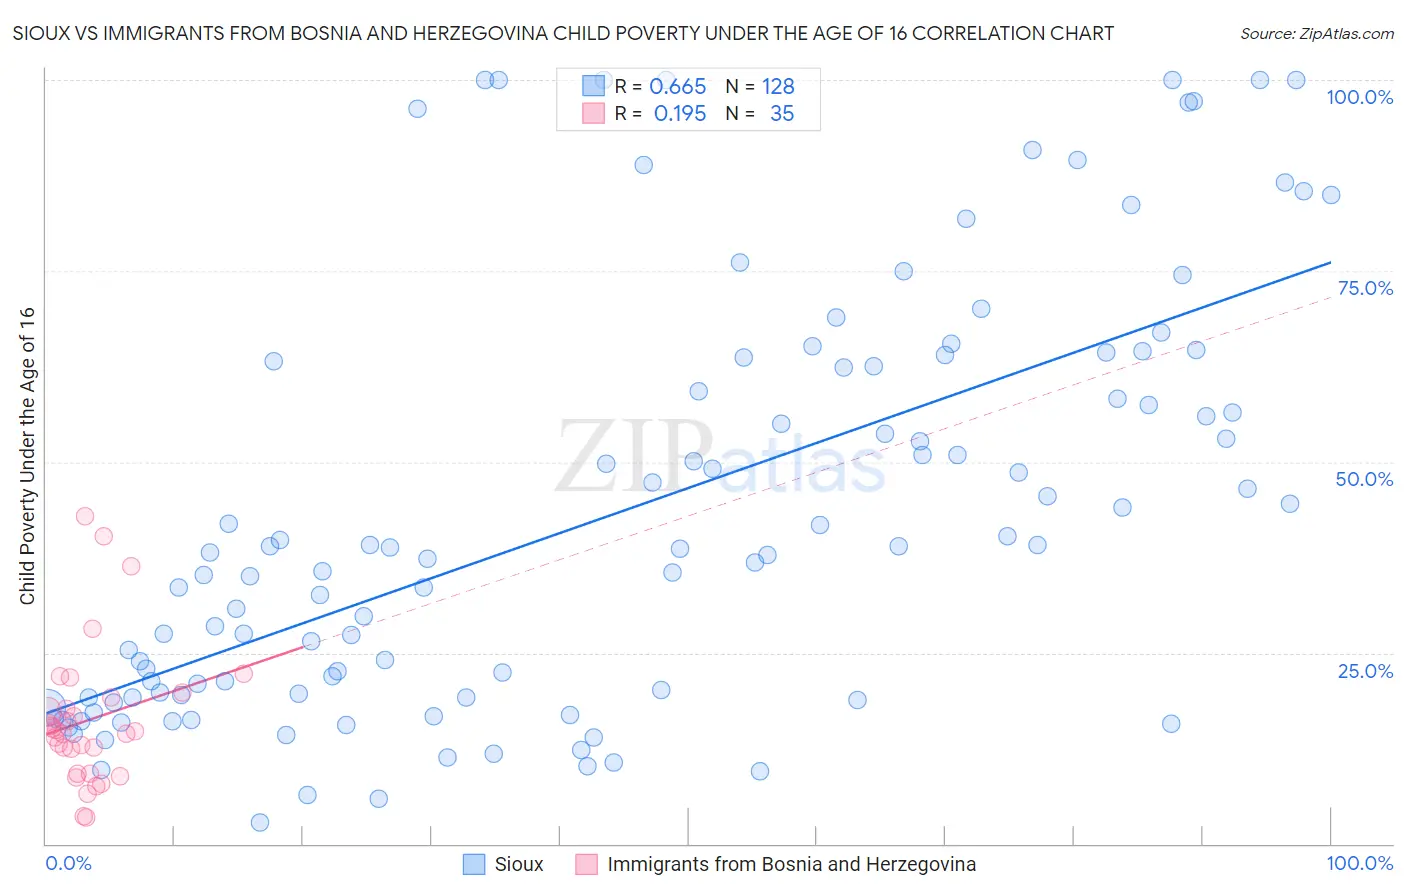 Sioux vs Immigrants from Bosnia and Herzegovina Child Poverty Under the Age of 16